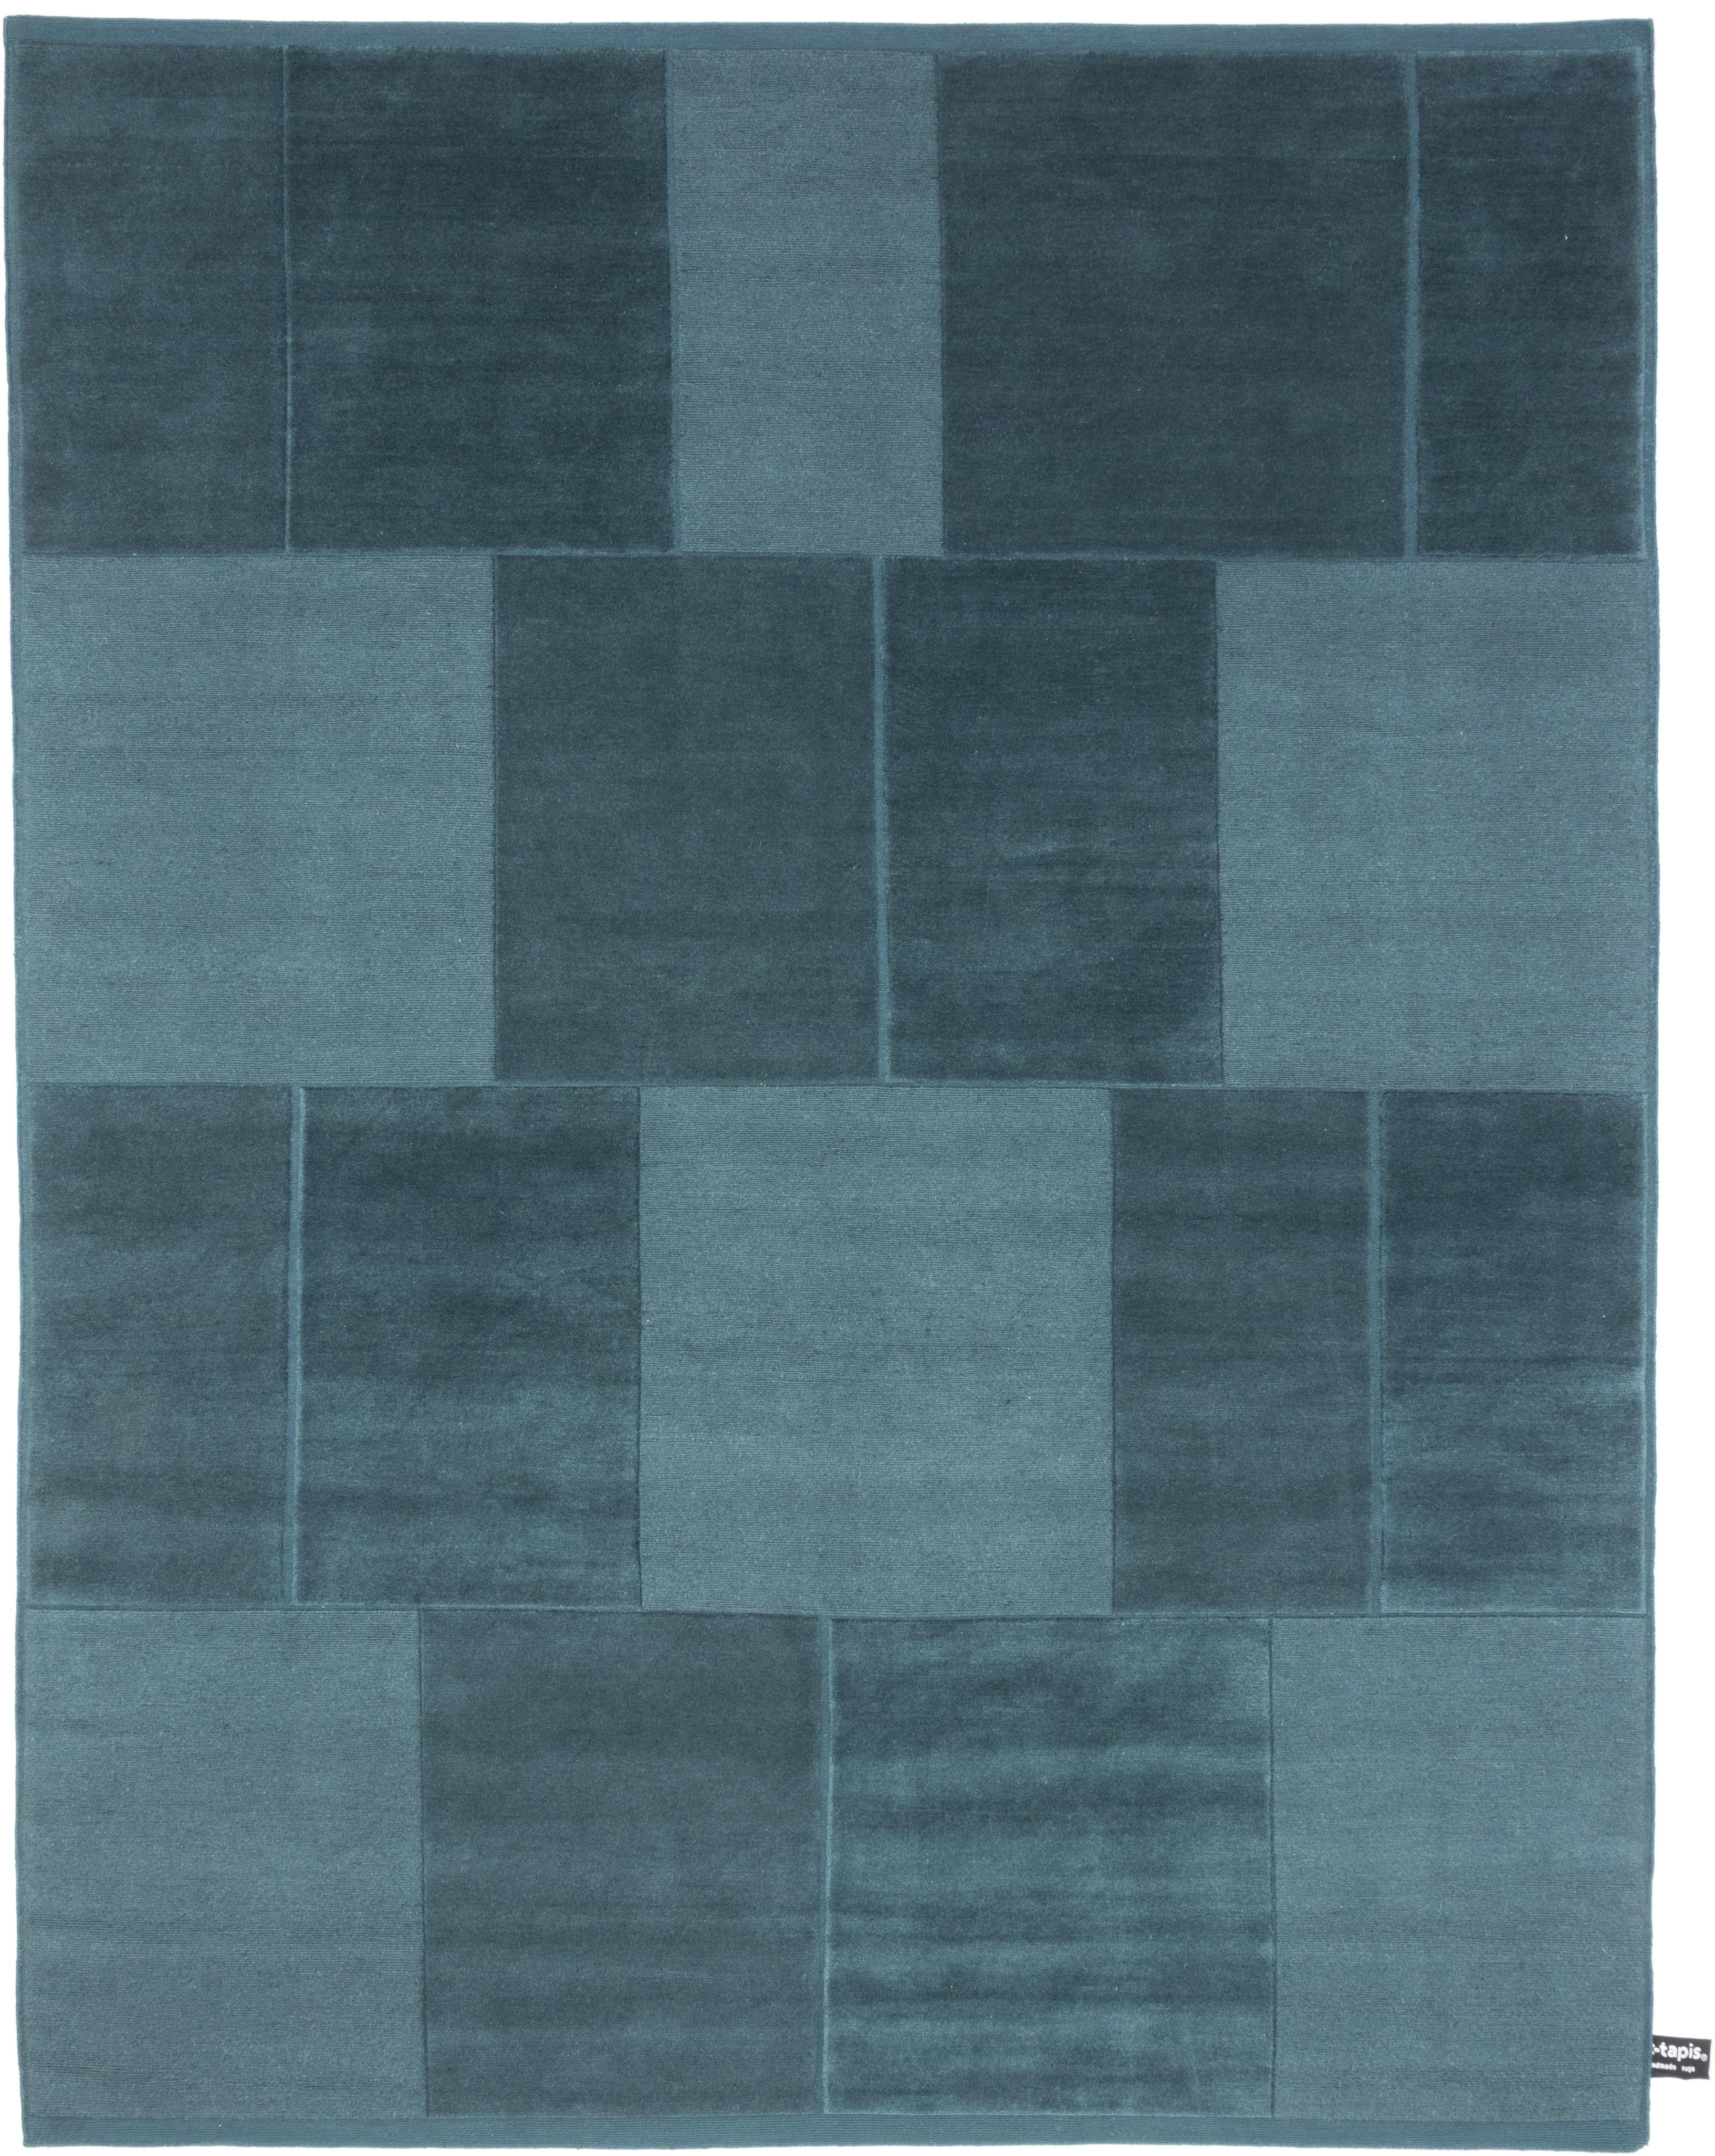 For Sale: Blue (Teal (CE-01)) cc-tapis Casellario Monocromo Ivory Rug by A. Parisotto & M. Formenton